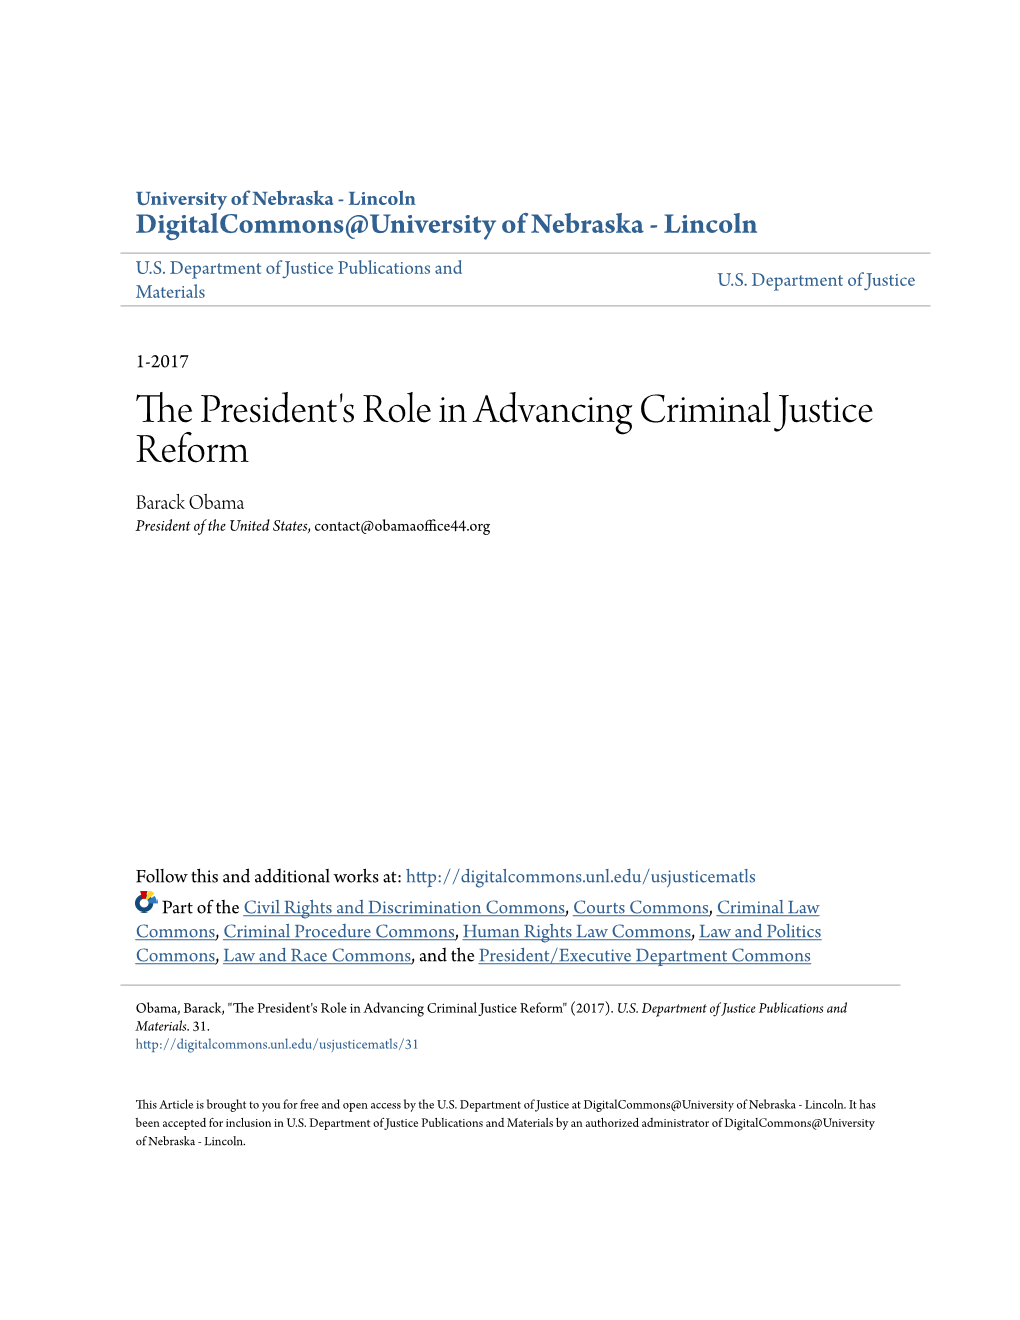 The President's Role in Advancing Criminal Justice Reform